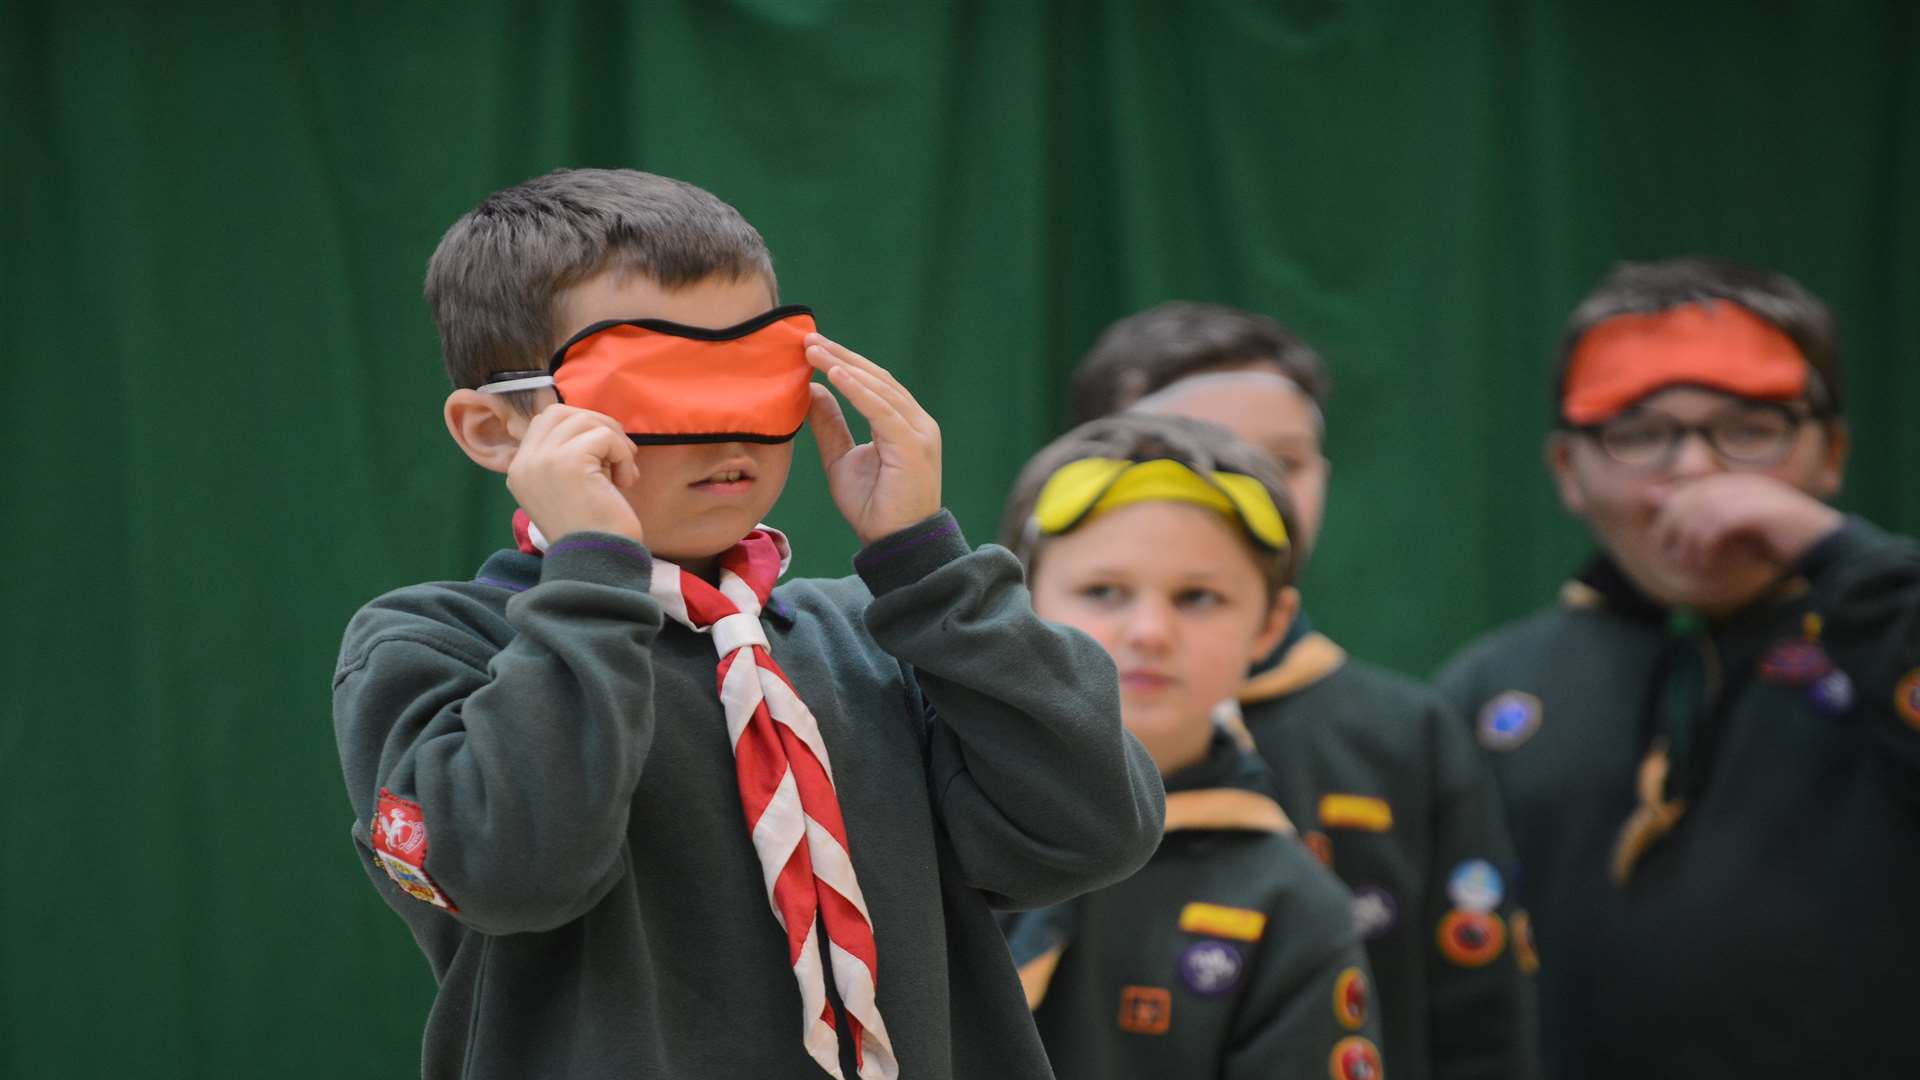 Folkestone and Hythe Cub Scout group using the hall to play blind football in February this year.